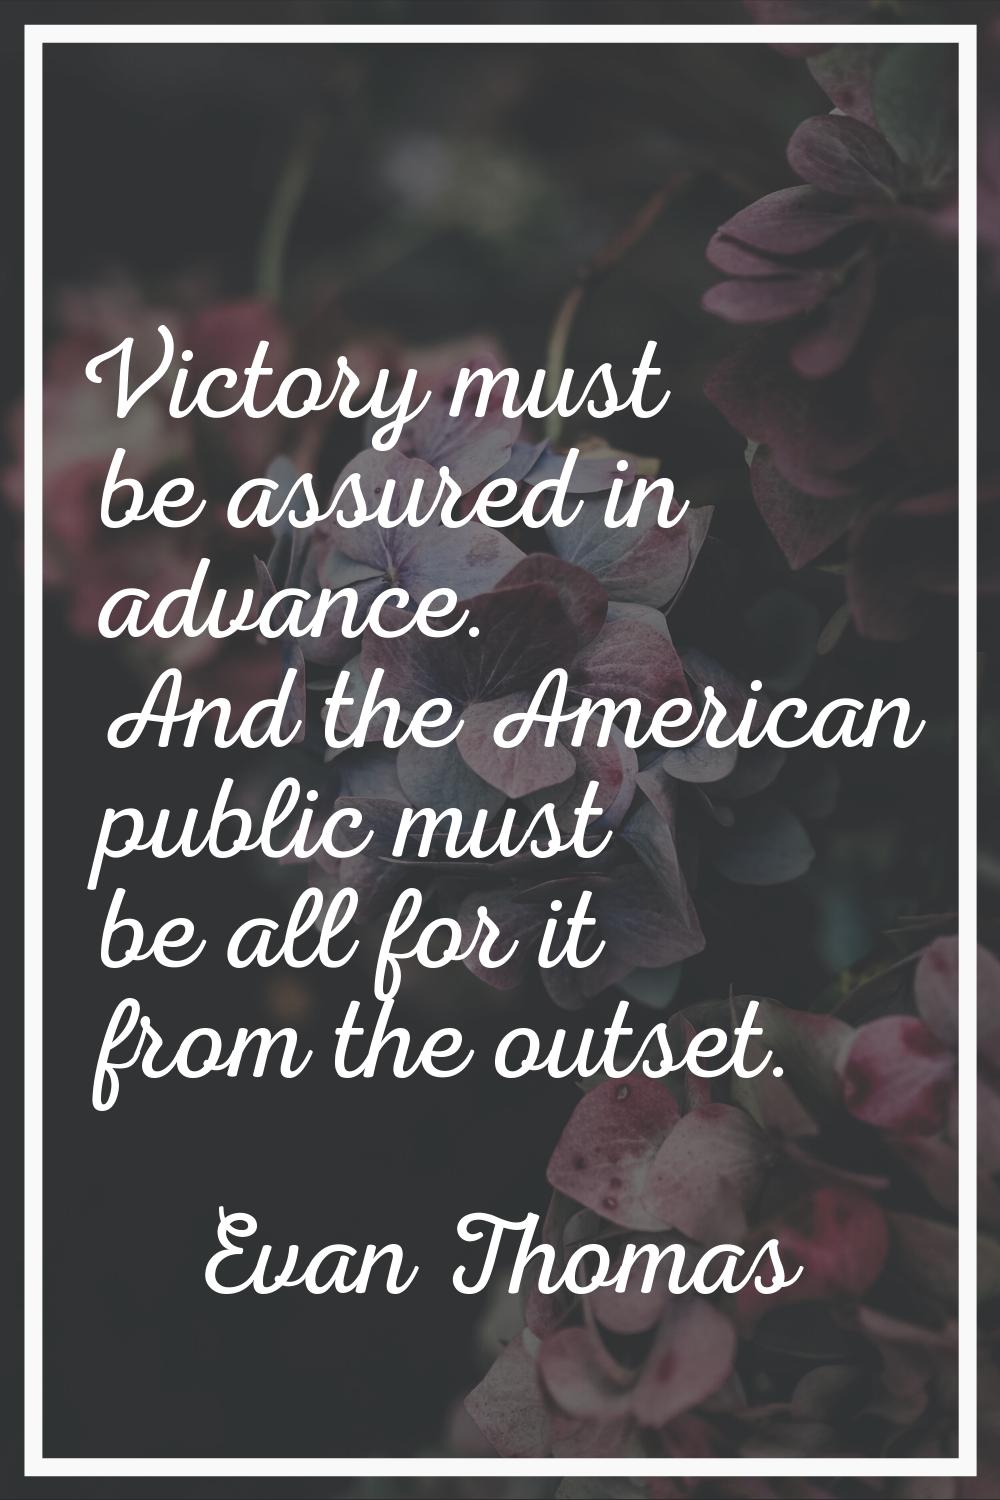 Victory must be assured in advance. And the American public must be all for it from the outset.